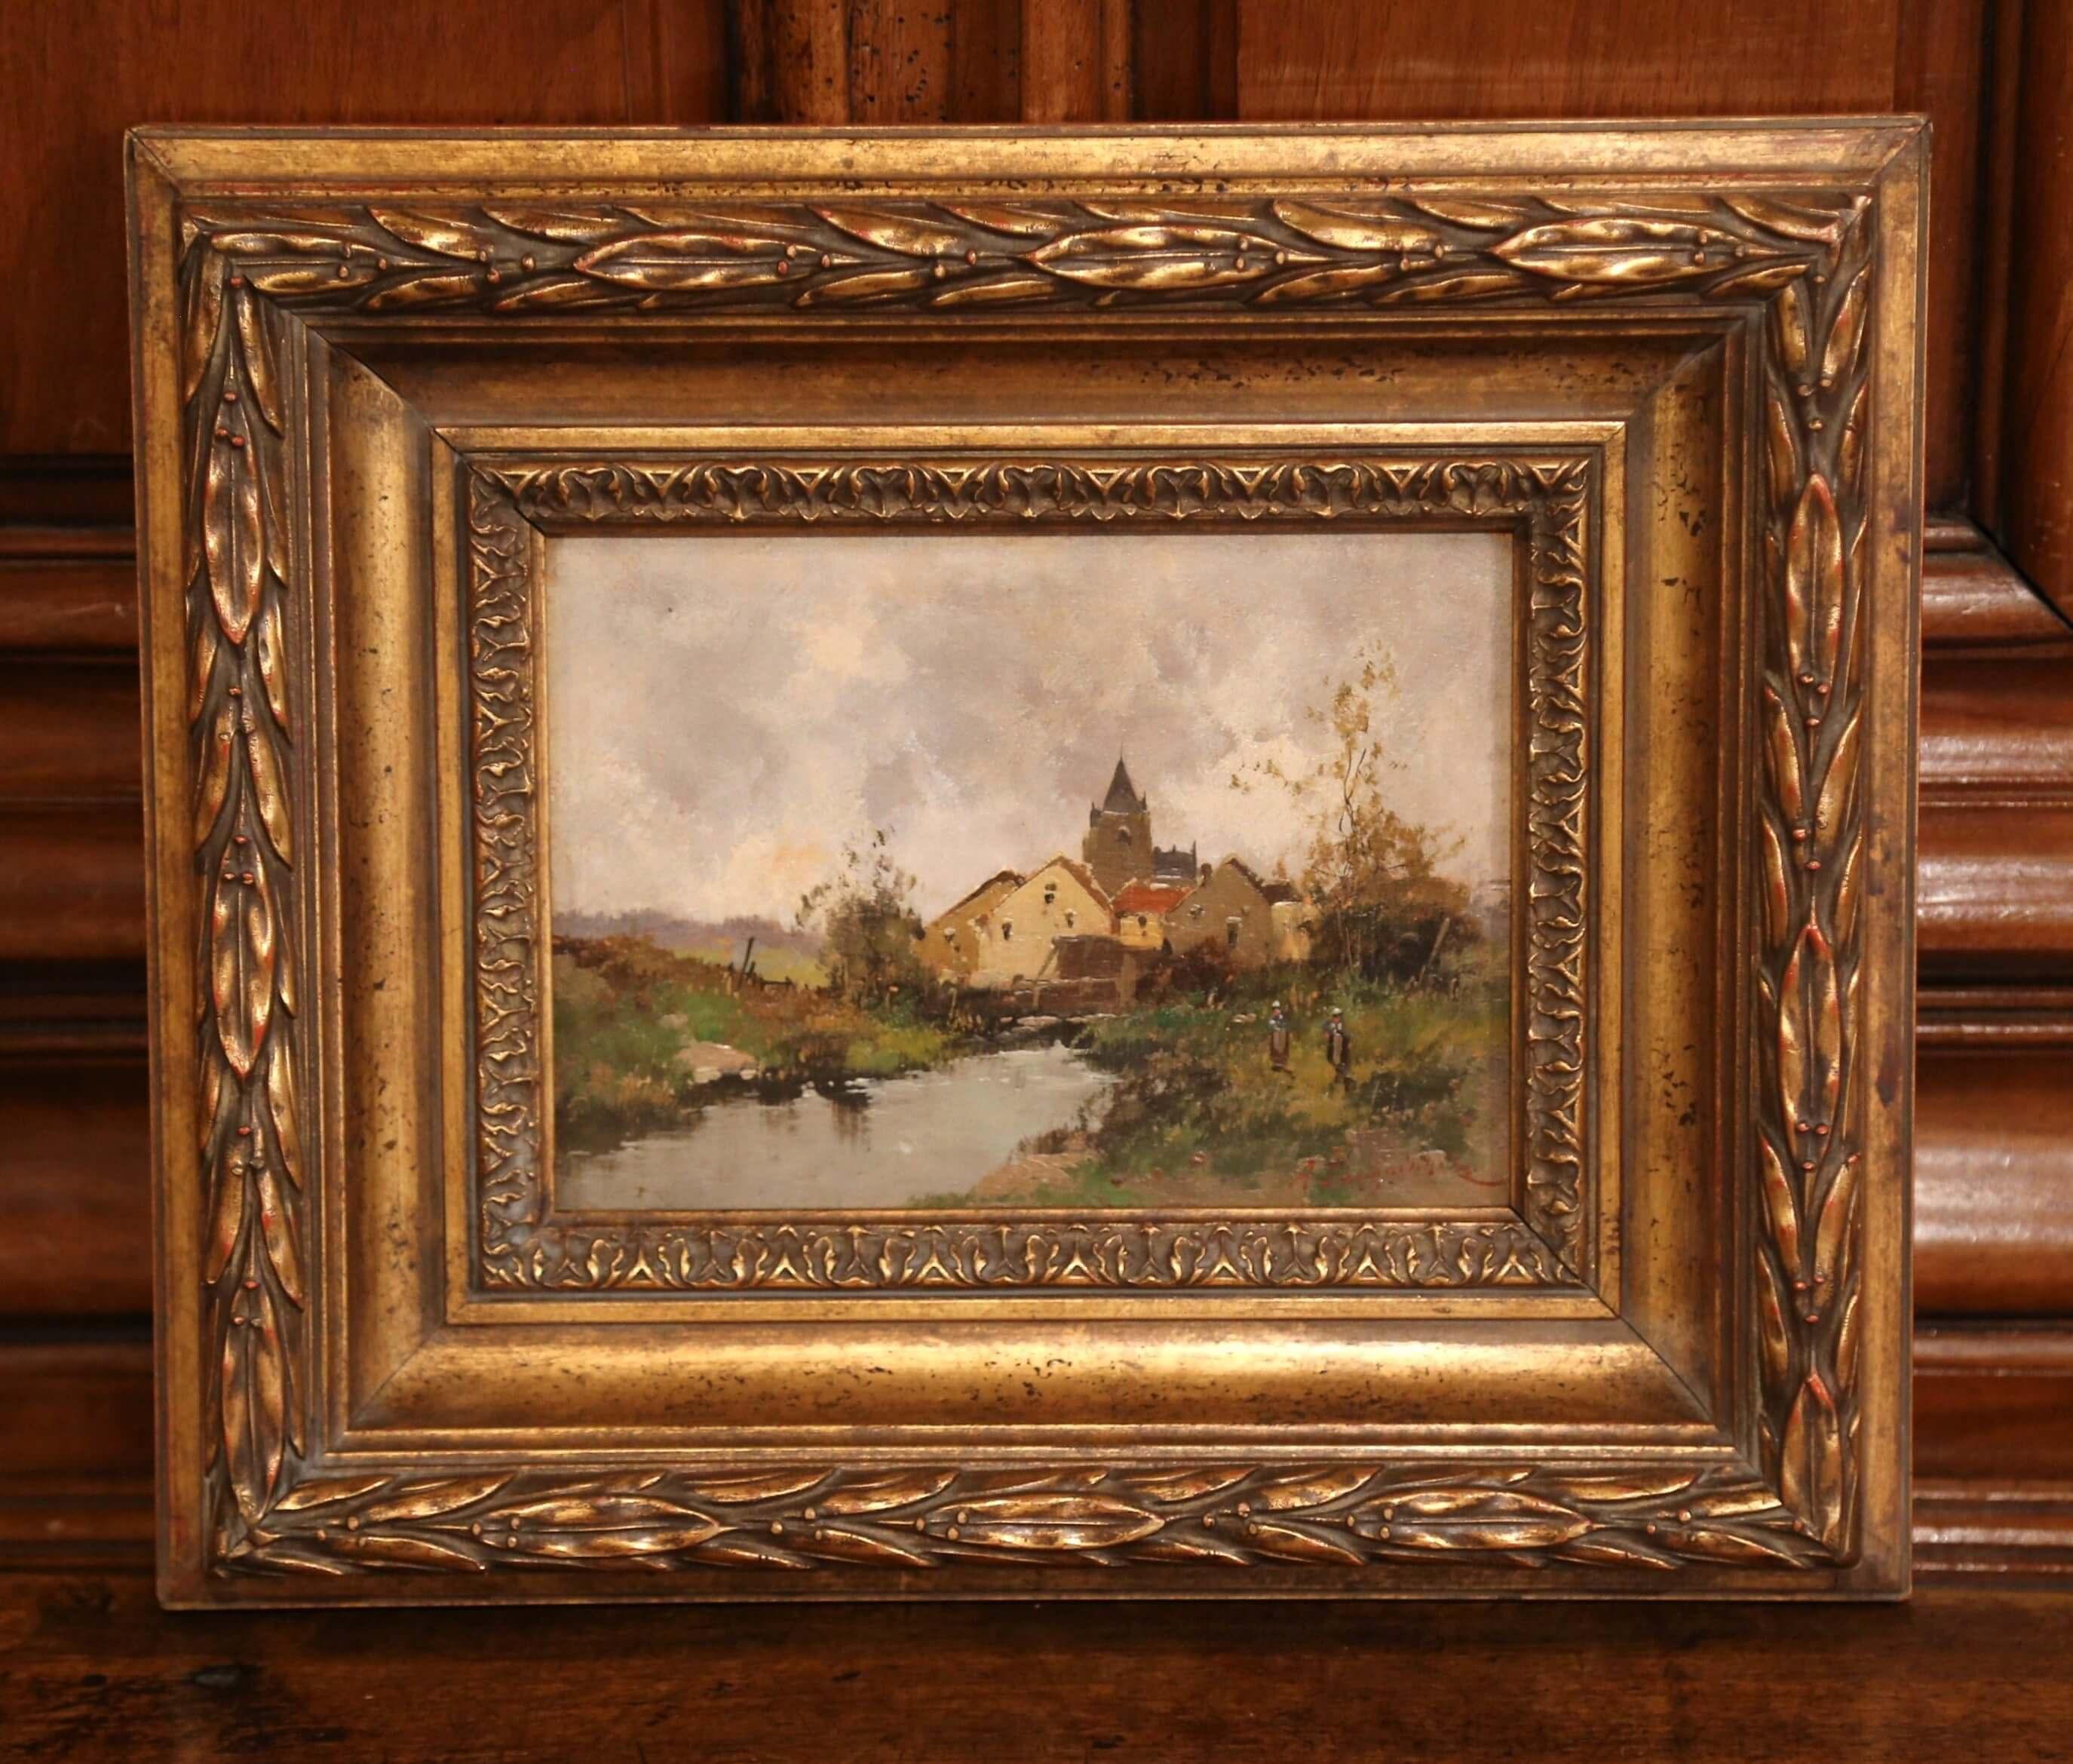 This pair of 19th century impressionist paintings feature two landscapes of rural, France. Set in carved, giltwood frames, the paintings are oil on board, and illustrate picturesque, countryside scenes. Both art works were done circa 1890, and are